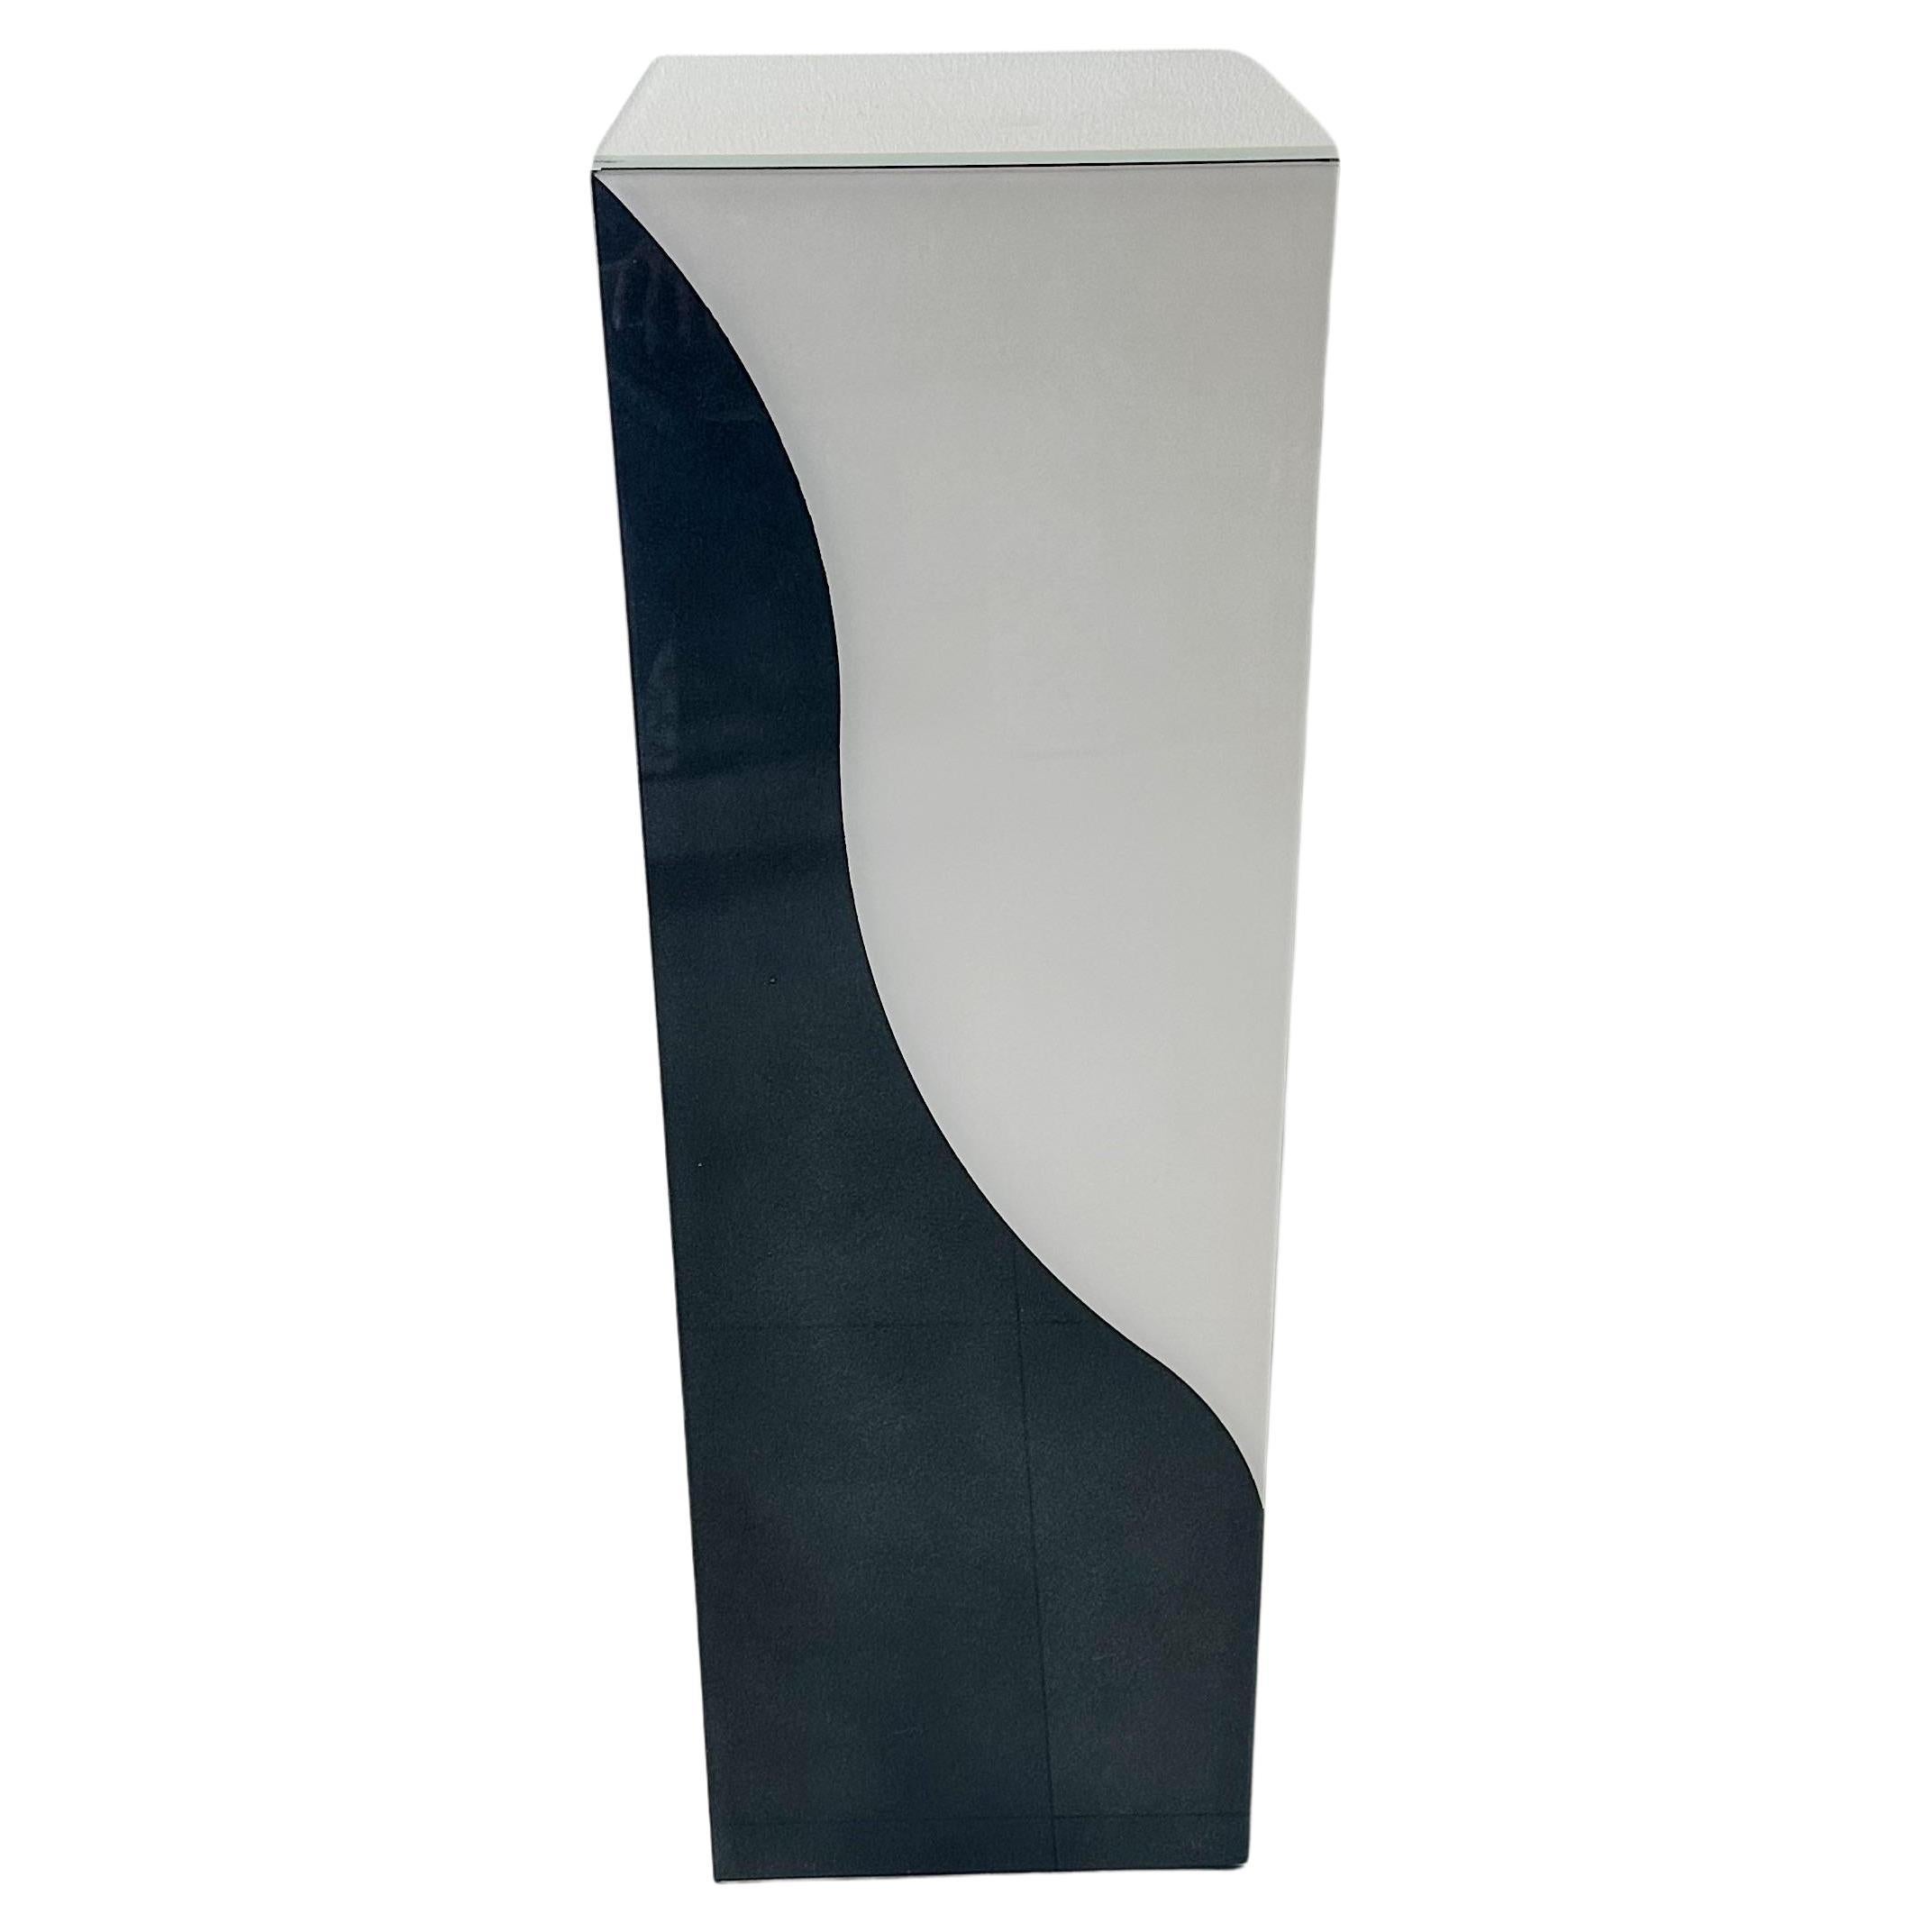 F. Hayman Chaffey for Directional Black and White Glass Pedestal